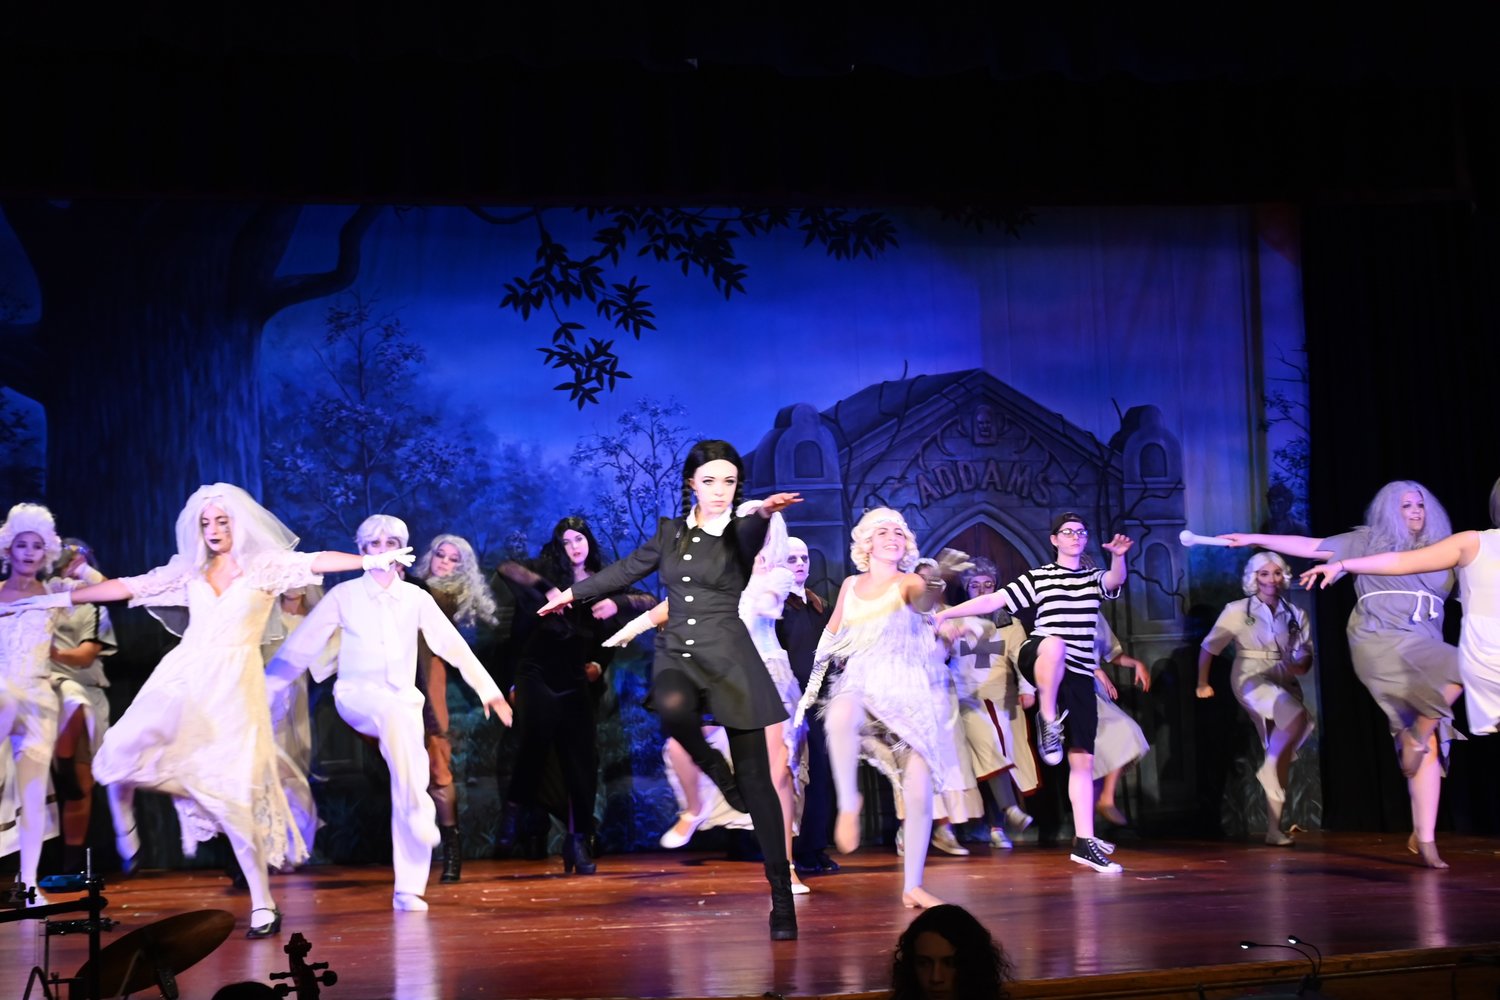 Long Beach High School students (l-r) Sammie Fales as Wednesday, Max Rosenzweig as Pugsley, Patrick O’Neill as Gomez and Ava Lithgow as Morticia.